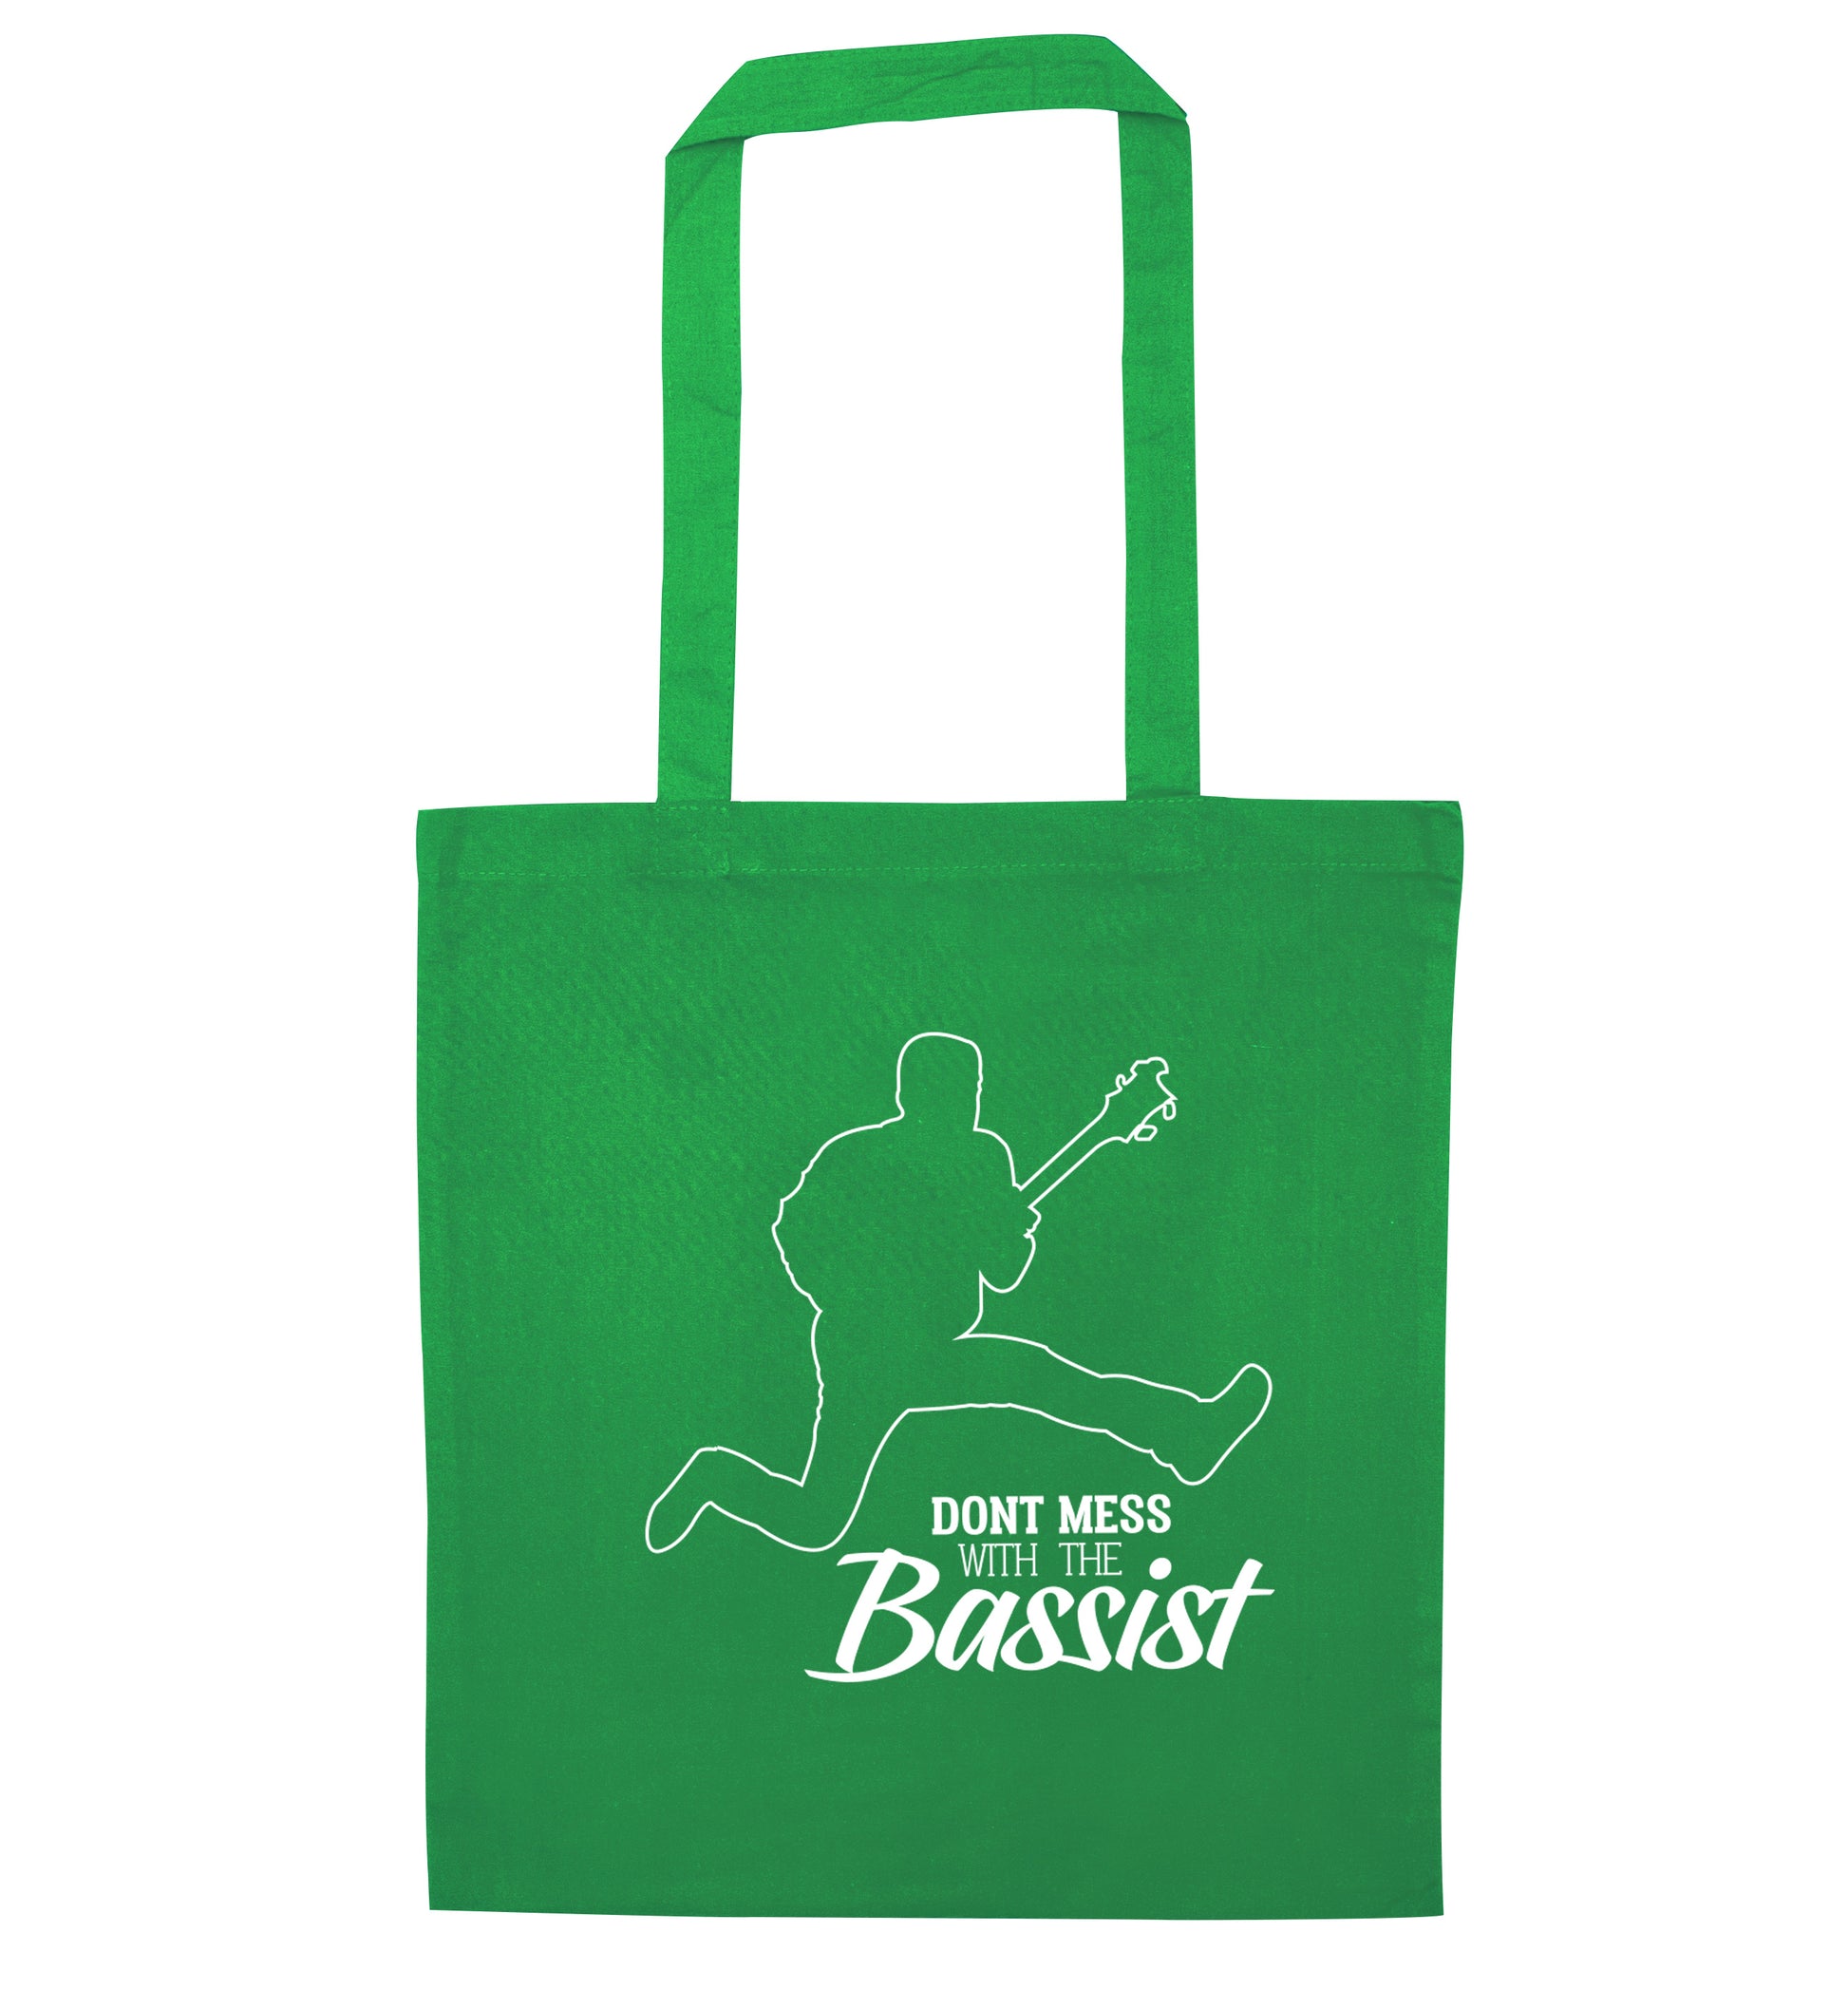 Dont mess with the bassist green tote bag